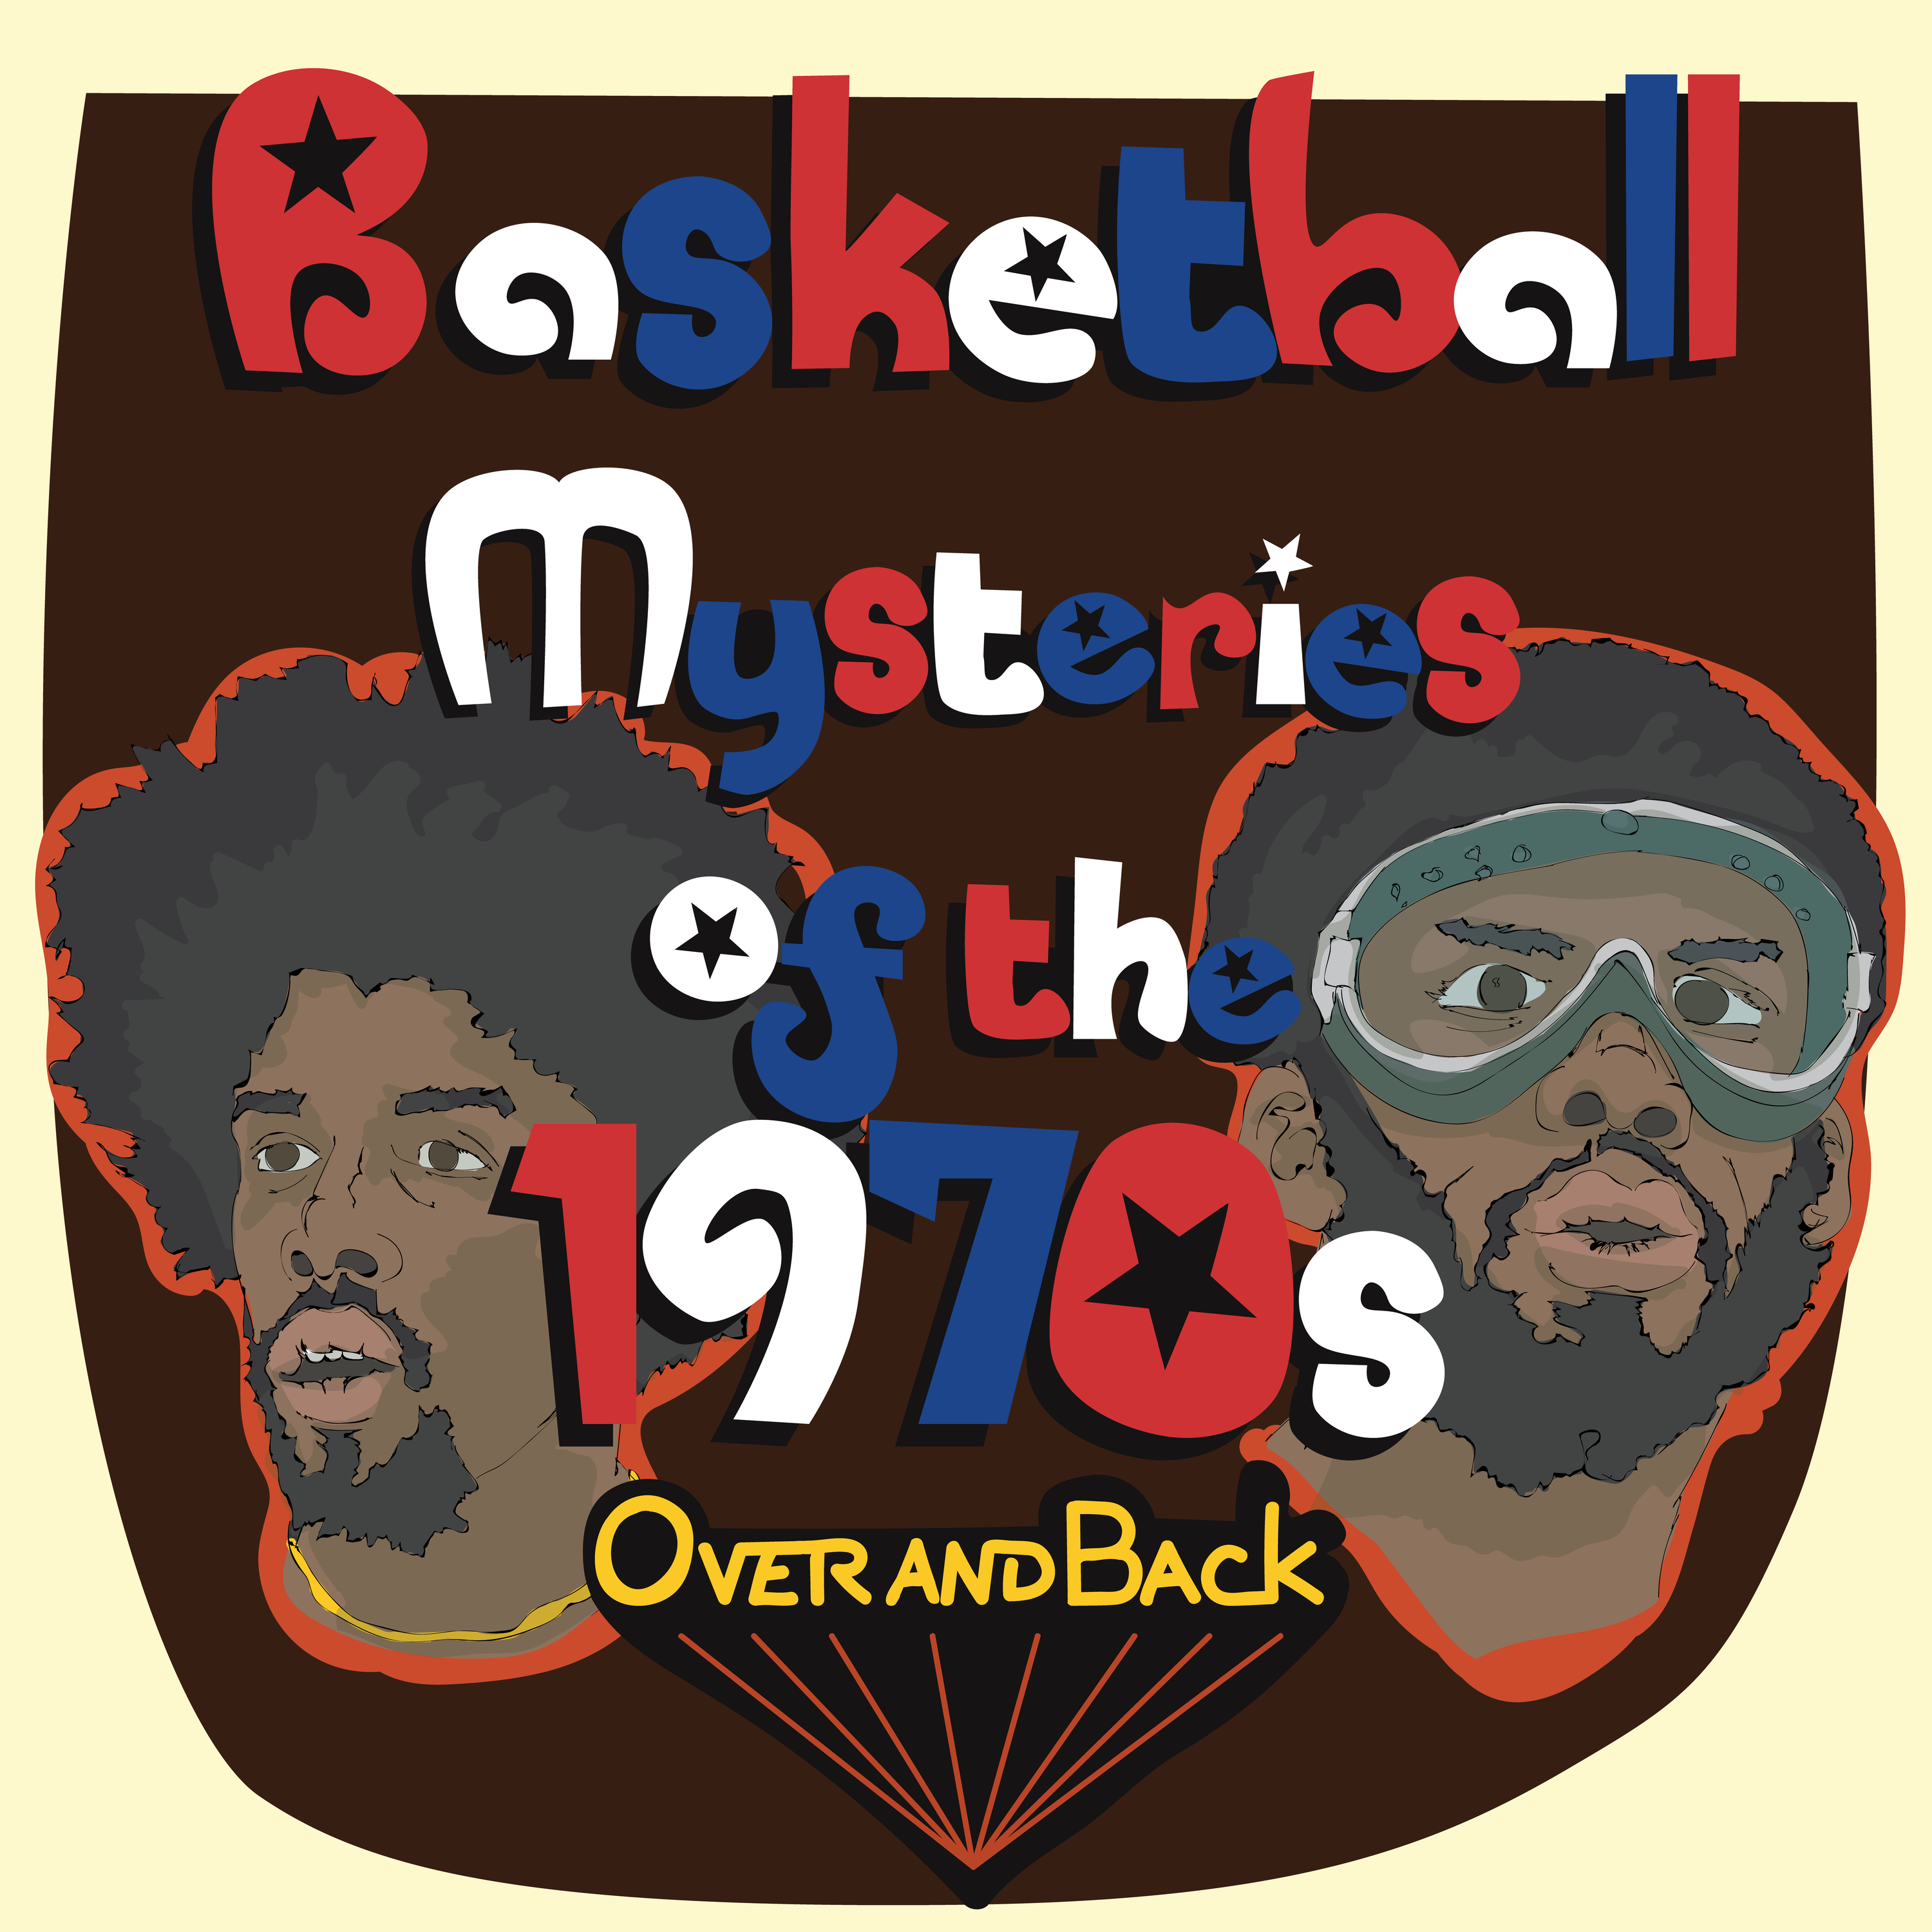 Where does 1973 fit in the Knicks’ mythology? (Basketball Mysteries of the 1970s #18)